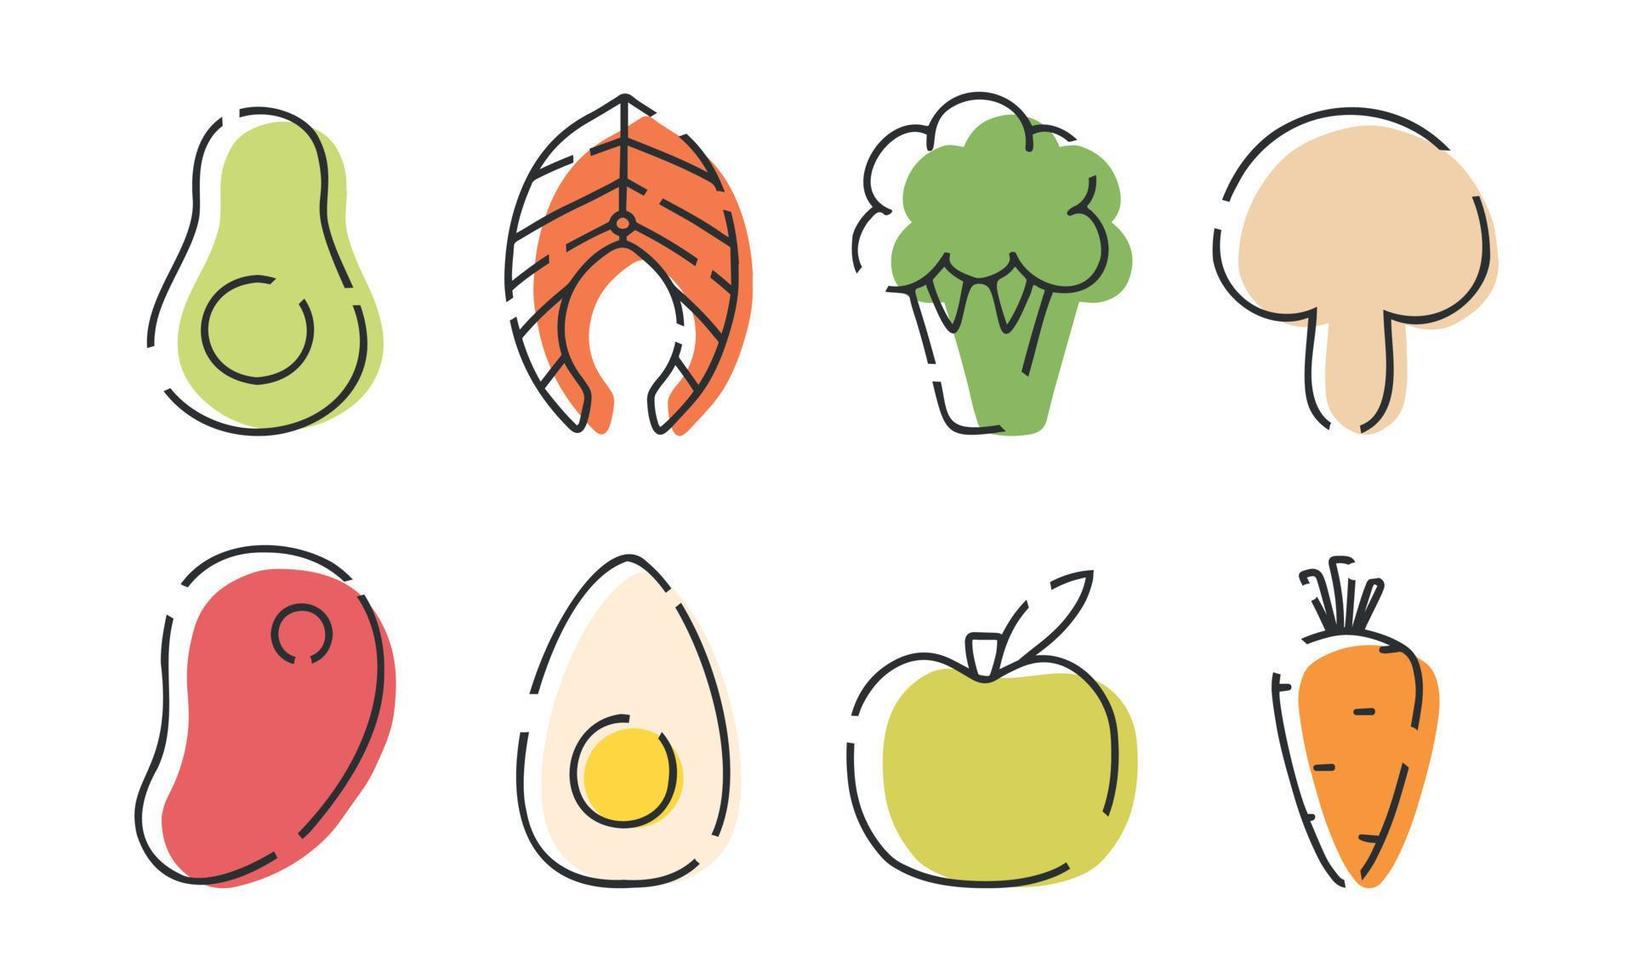 Set of linear icons of healthy food. Modern icons of proper nutrition. Vector illustration. Collection of linear avocado, salmon, steak, apple, egg, carrot.